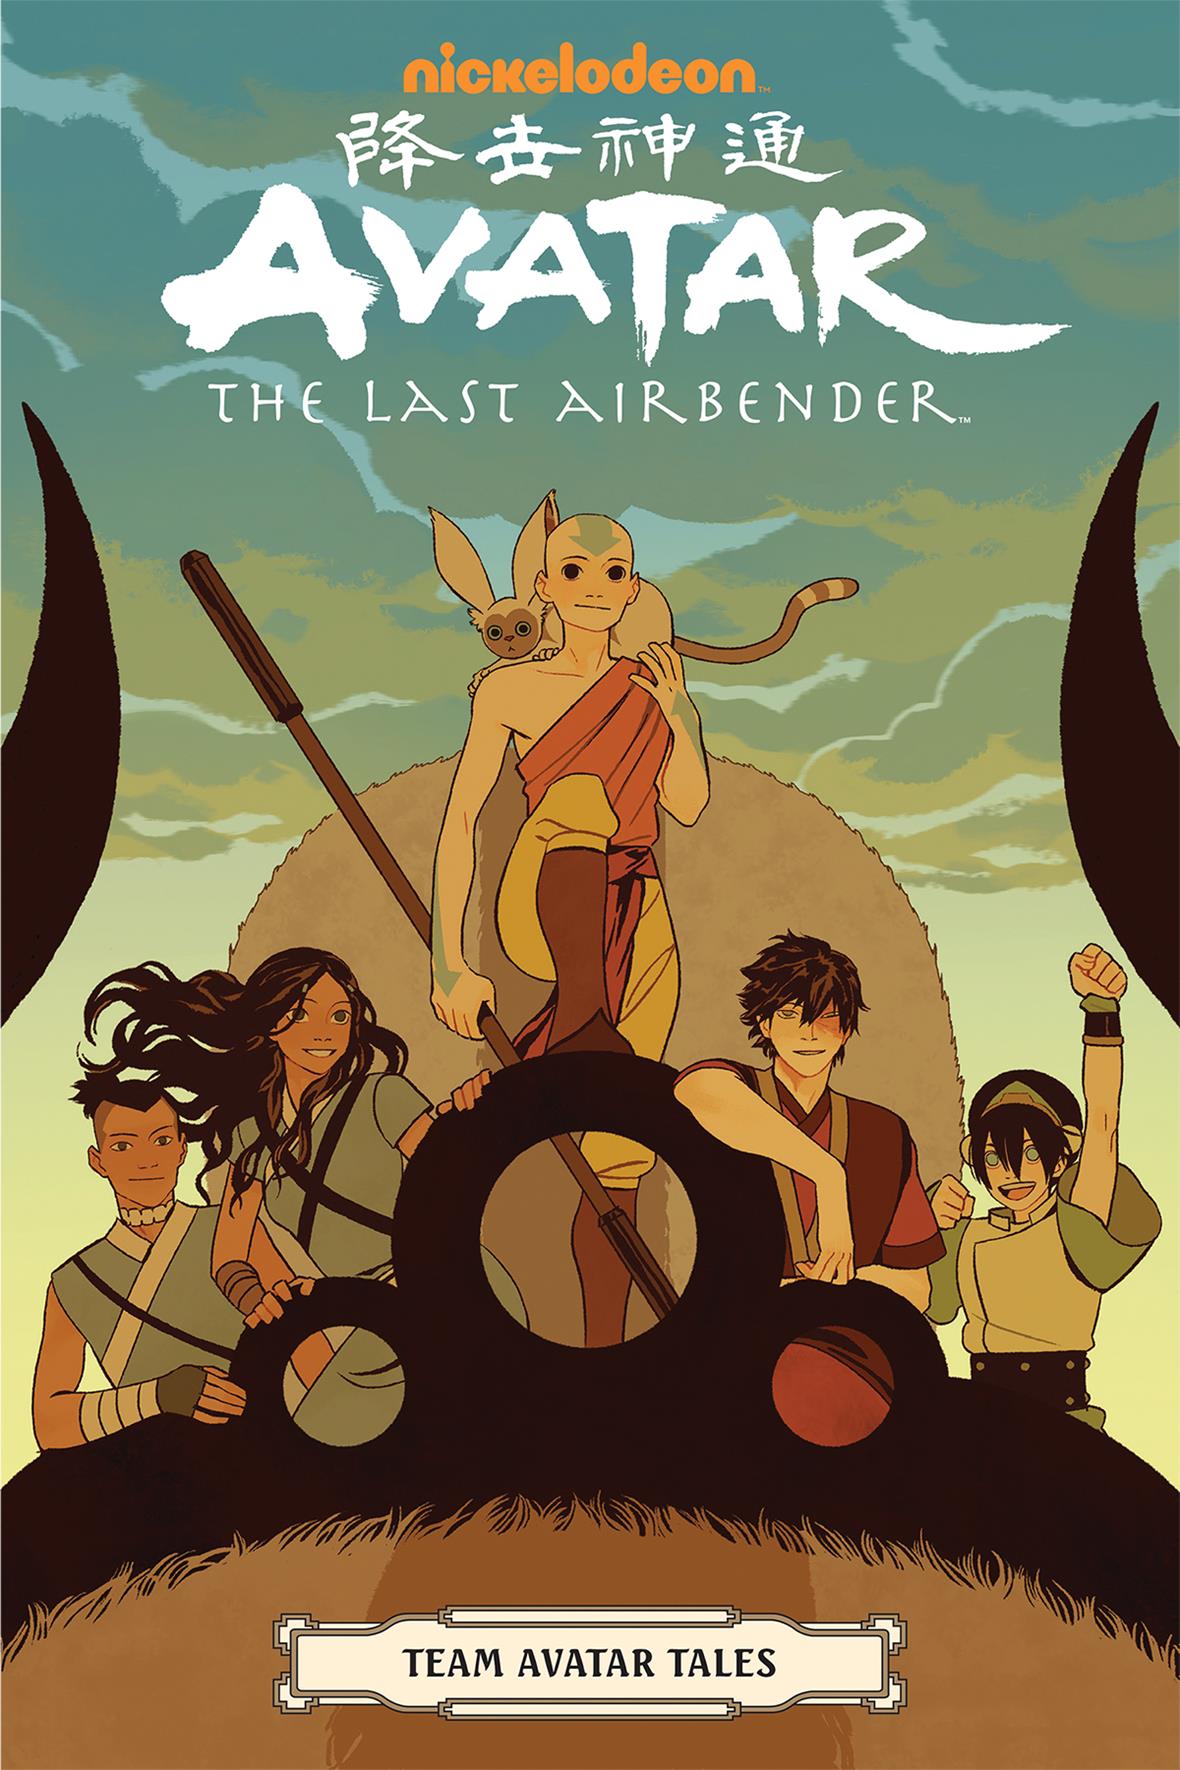 SDCC Comic Con 2016 Avatar The Last Airbender Gene Luen Yang Signed Poster 